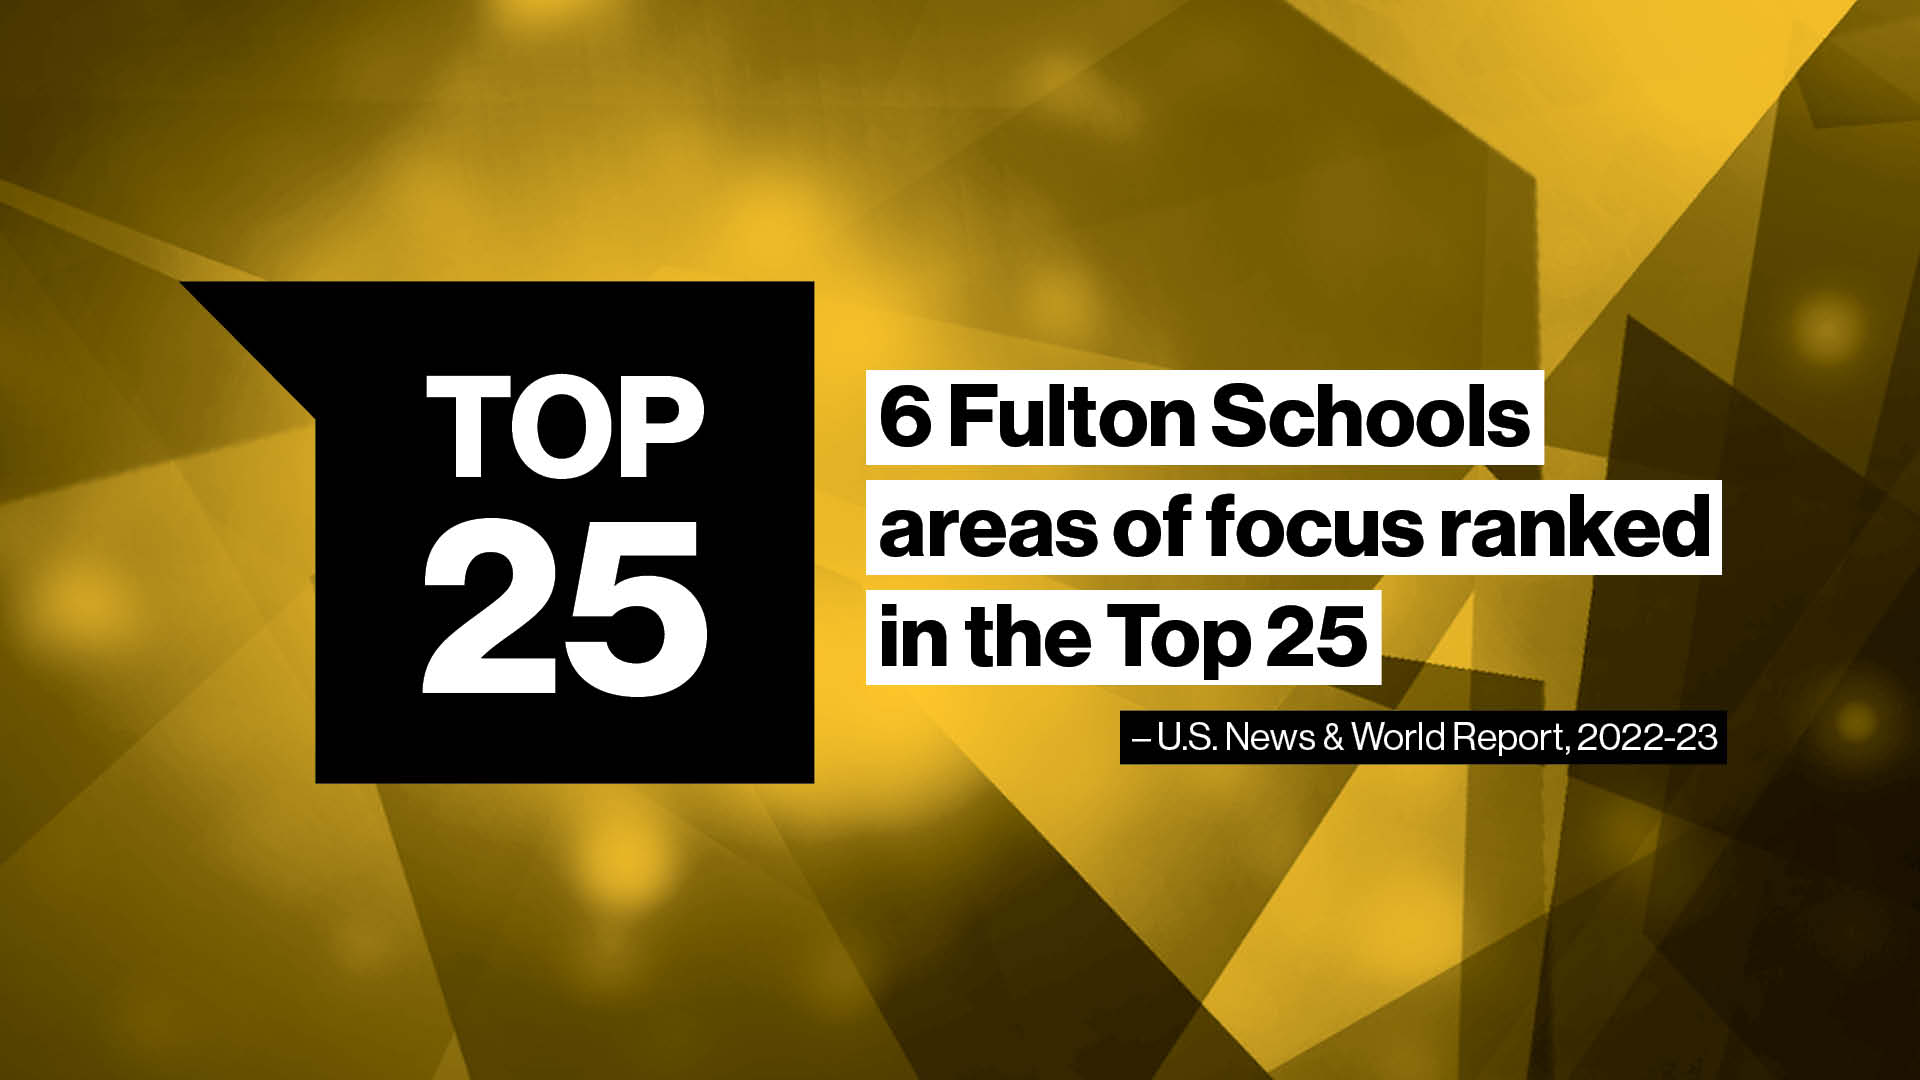 "Top 25" "6 Fulton Schools areas of focus ranked in the Top 25 - U.S. News & World Report, 2022-23"